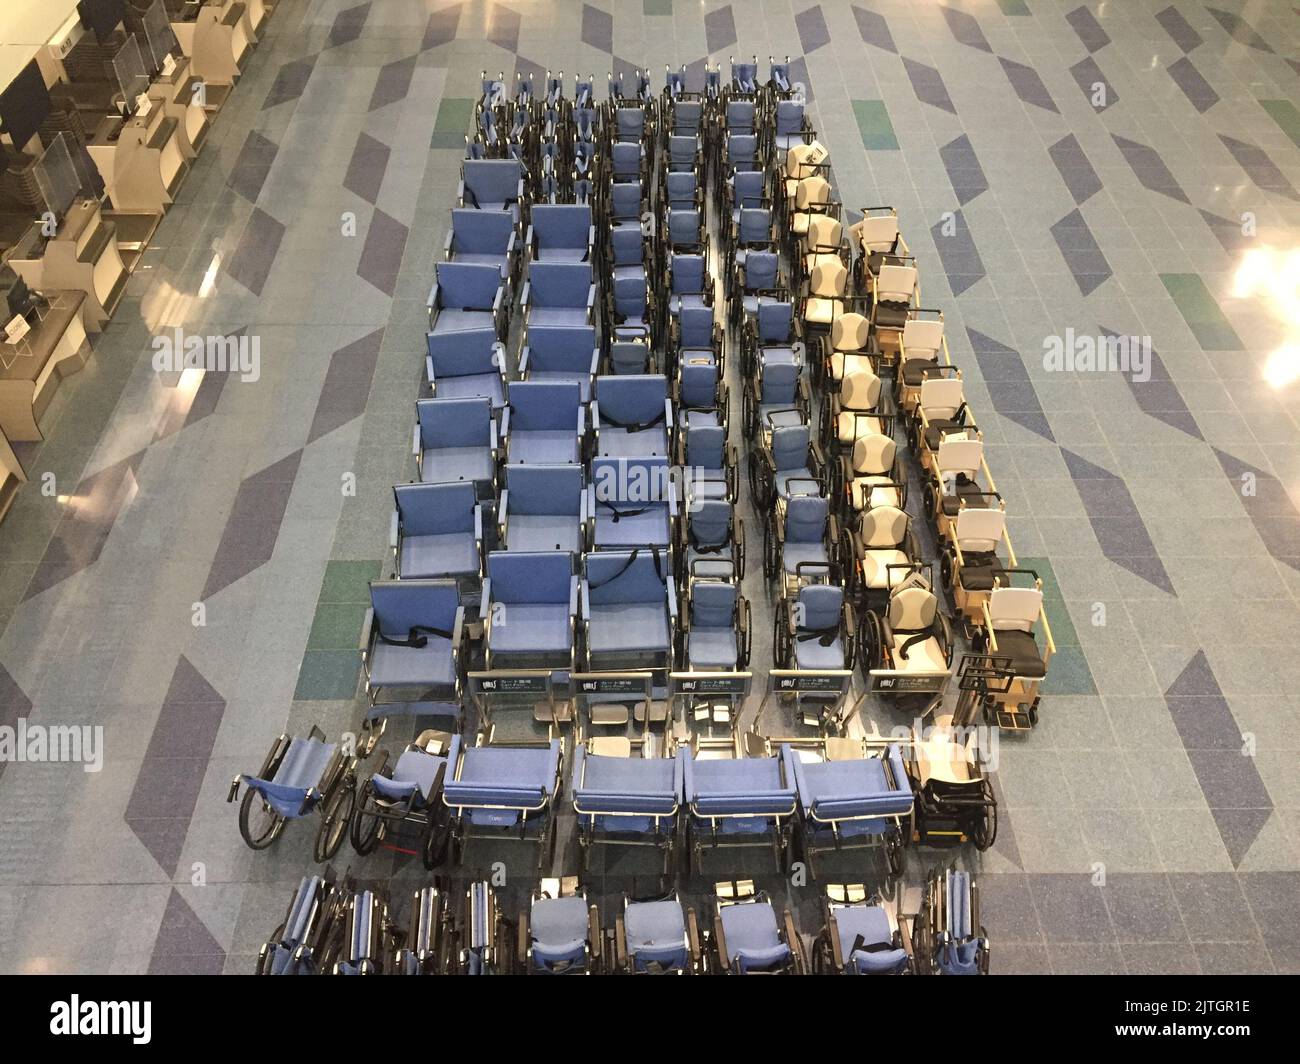 Rows of empty airport luggage carts Stock Photo